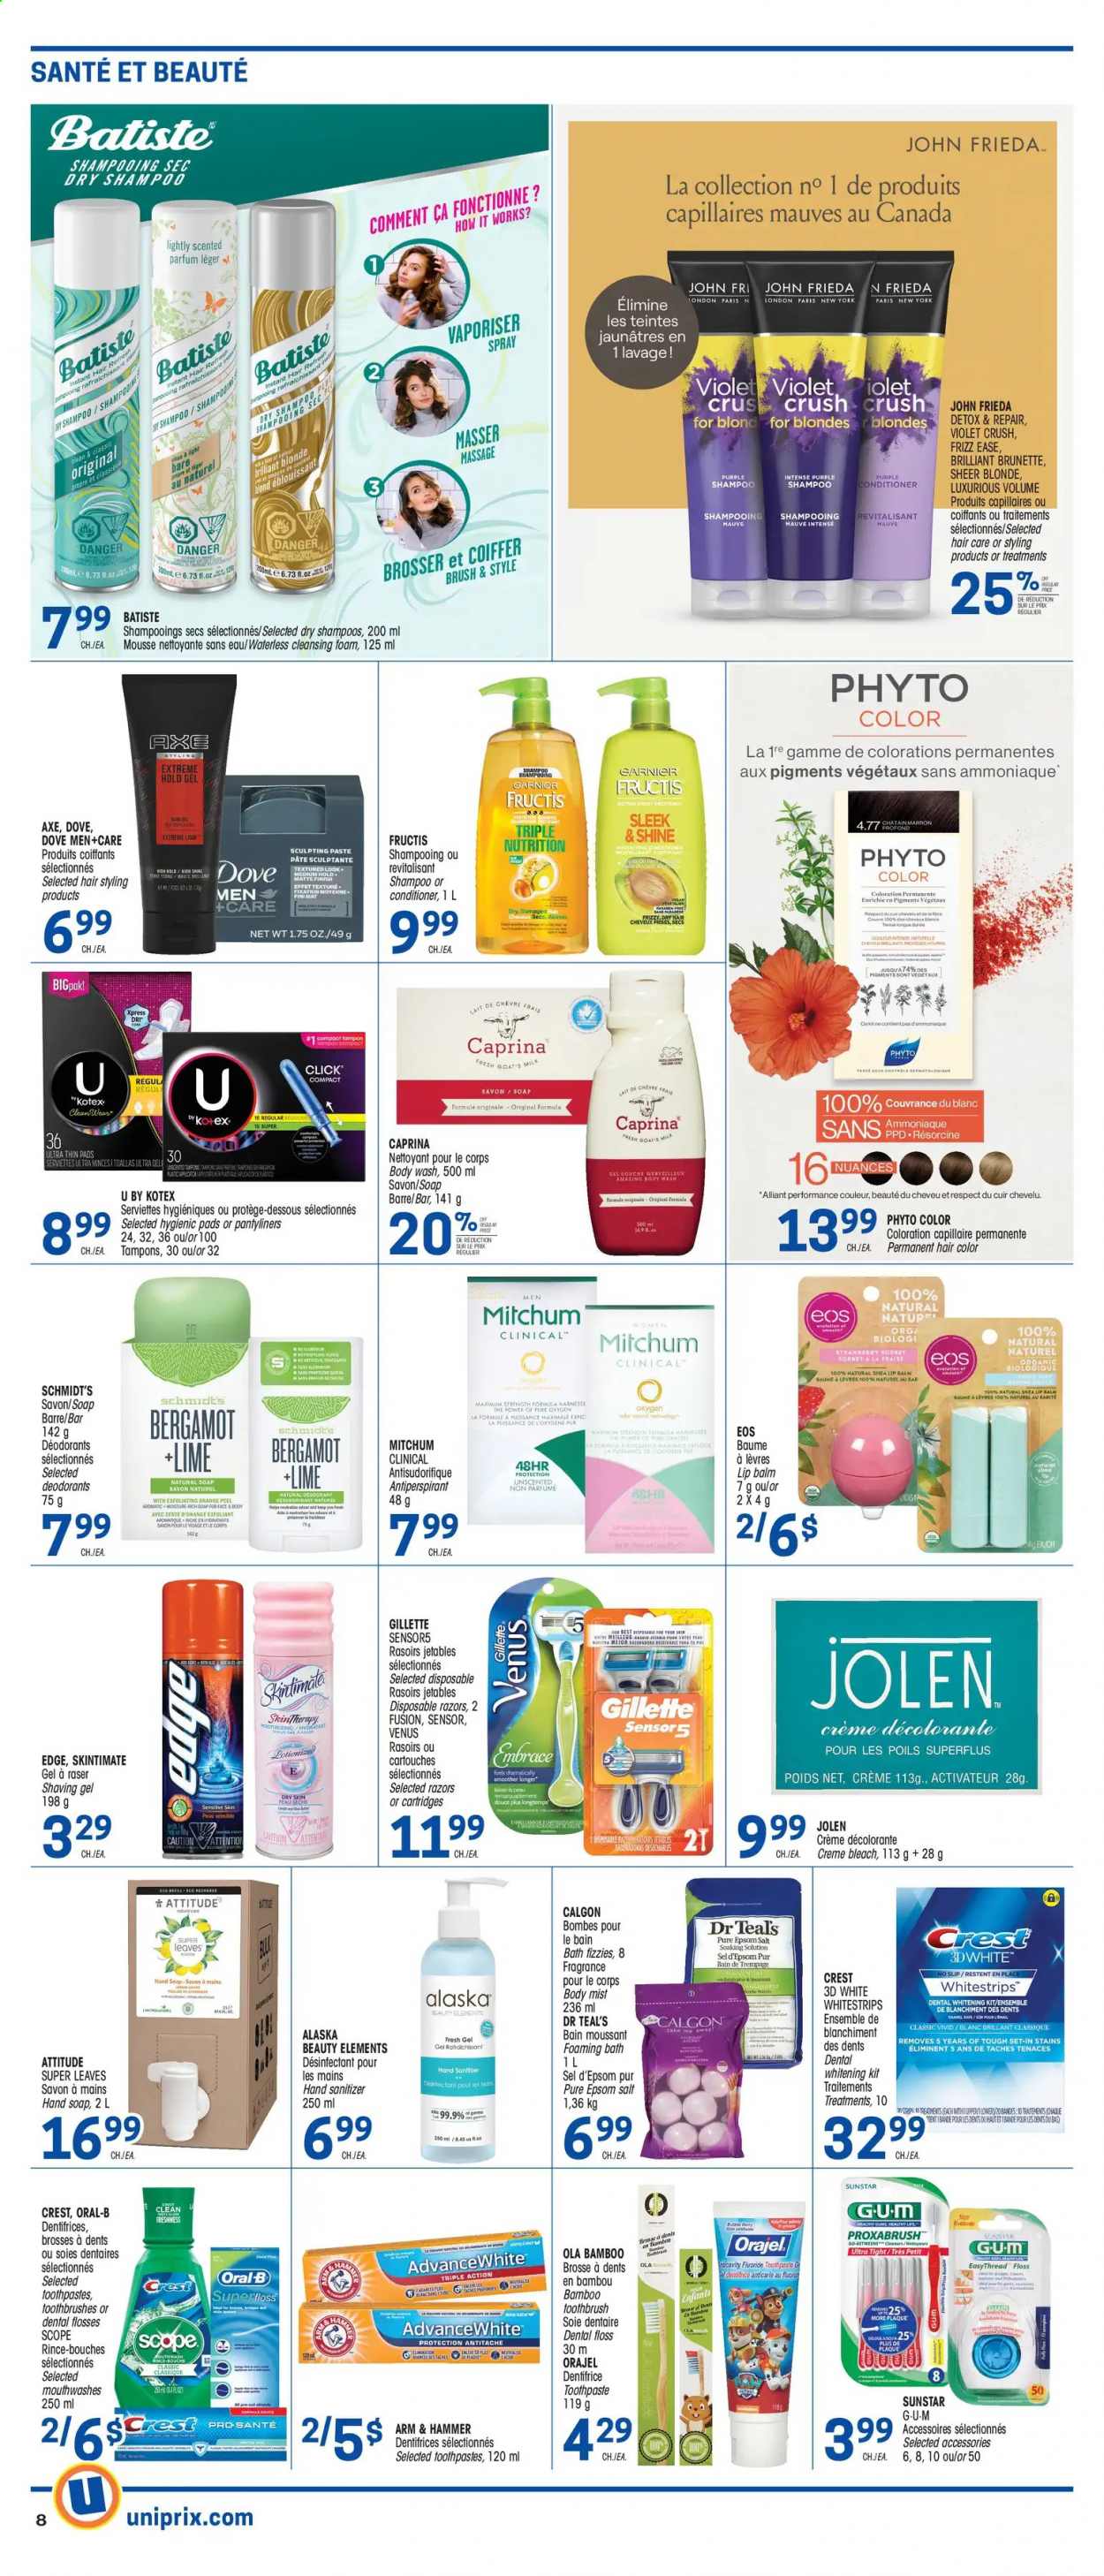 thumbnail - Uniprix Flyer - January 21, 2021 - January 27, 2021 - Sales products - ARM & HAMMER, bleach, body wash, hand soap, soap, toothbrush, toothpaste, Crest, Kotex, pantyliners, tampons, cleansing foam, lip balm, conditioner, hair color, John Frieda, Fructis, body mist, anti-perspirant, fragrance, Venus, disposable razor, hand sanitizer, Garnier, Gillette, shampoo, Oral-B, deodorant. Page 6.